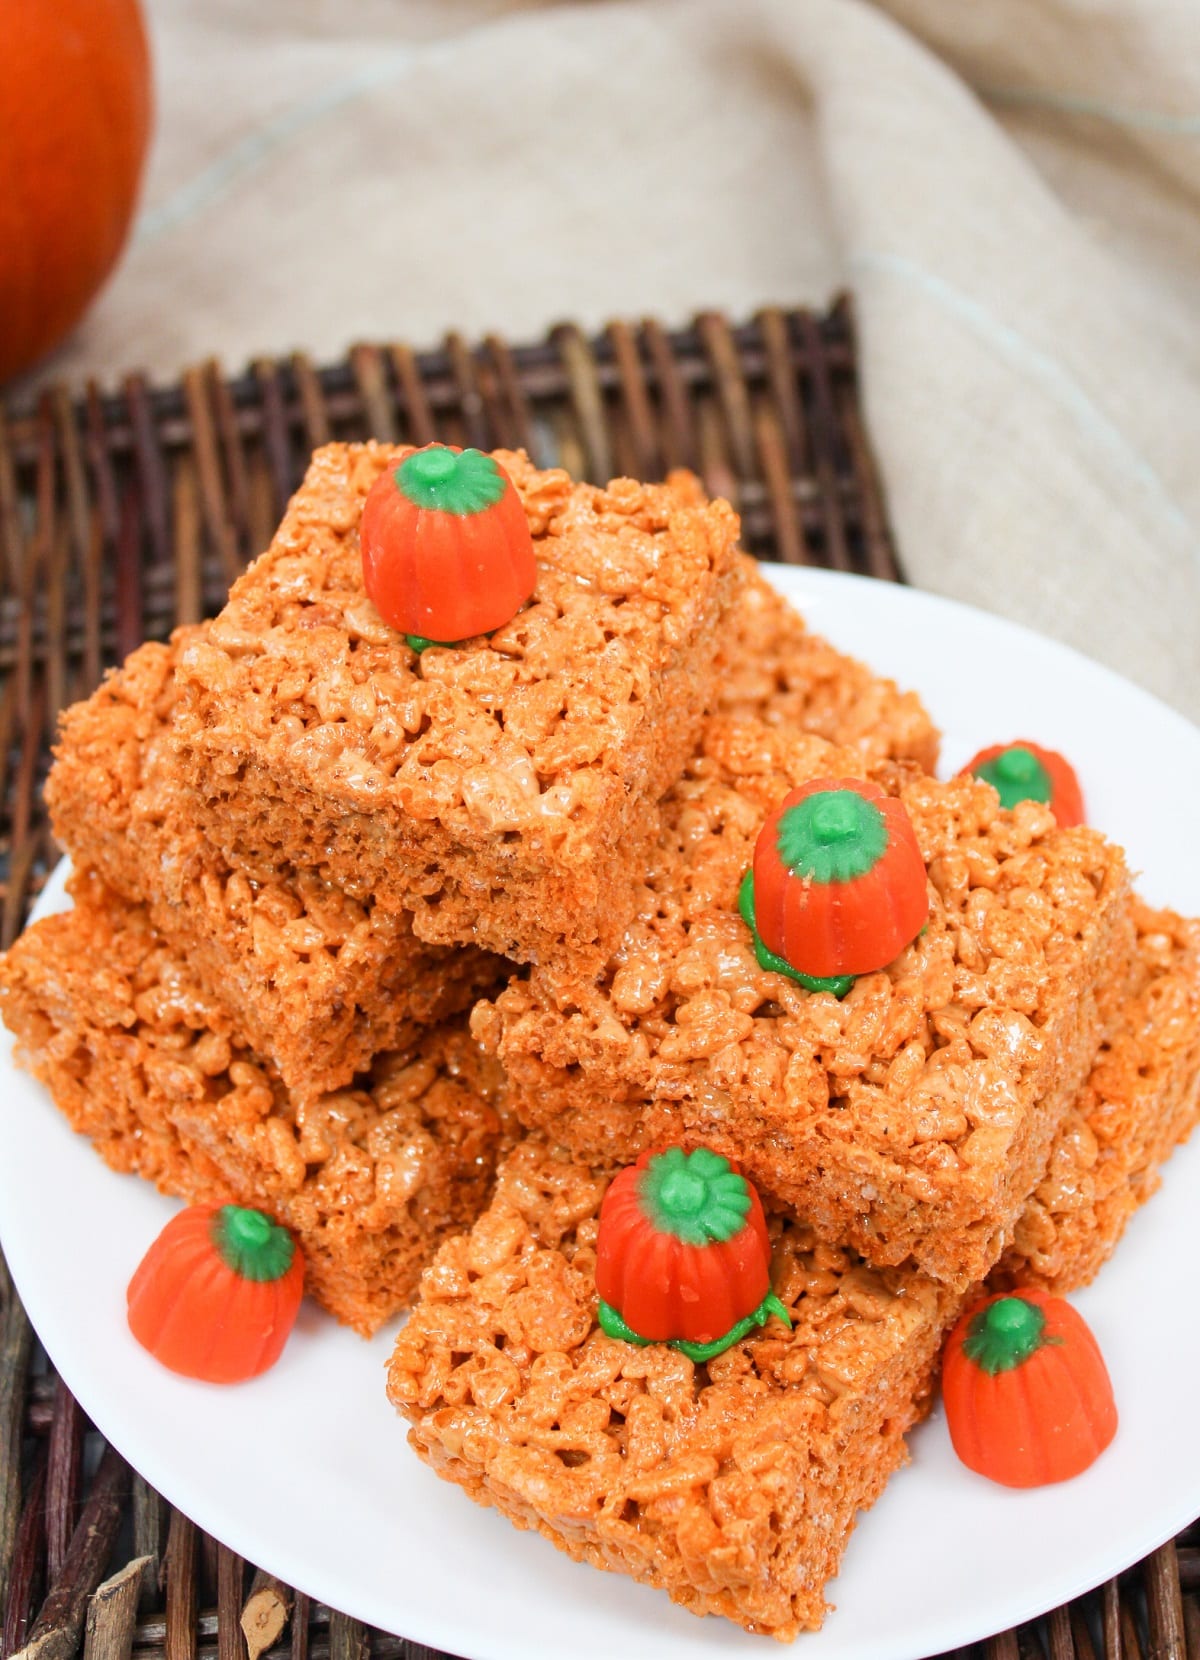 orange rice krispie treats cut into squares and stacked. Topped with a candy pumpkin.